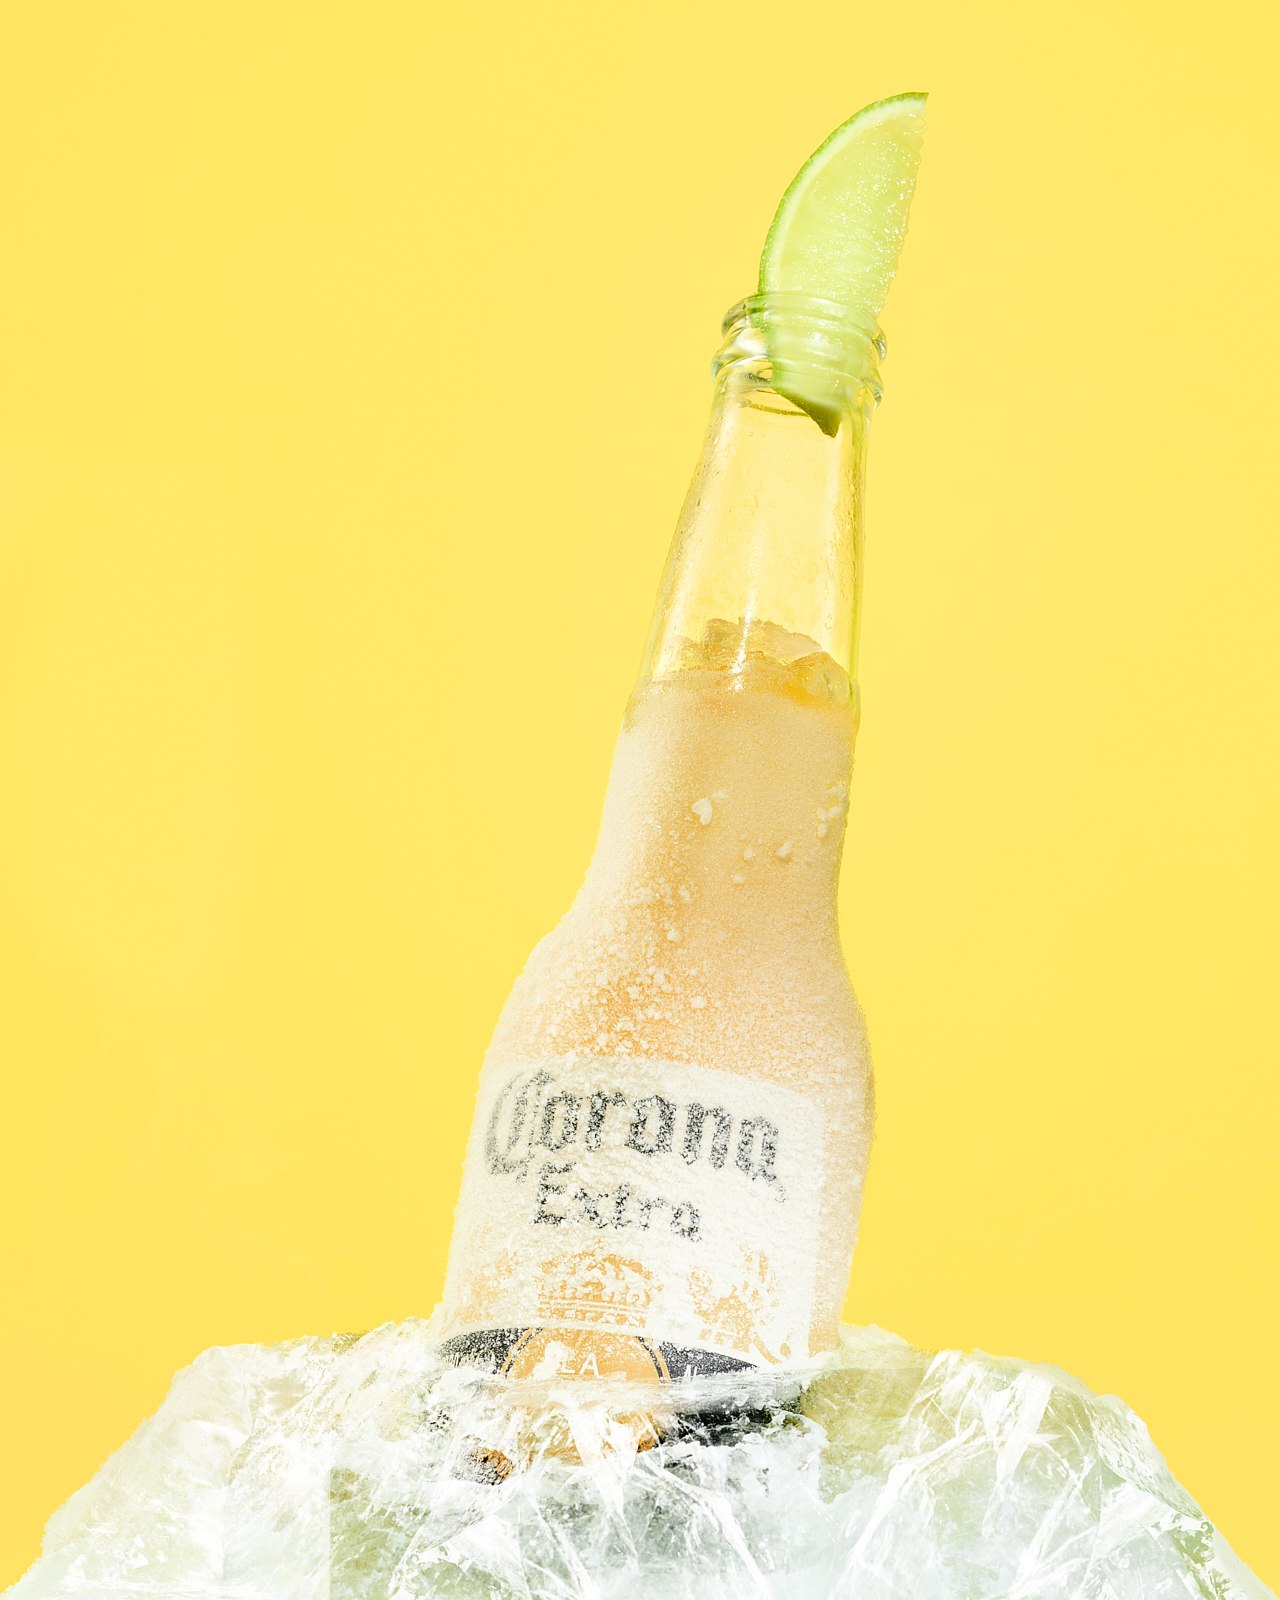 Corona bottle with lime wedge frozen in ice block